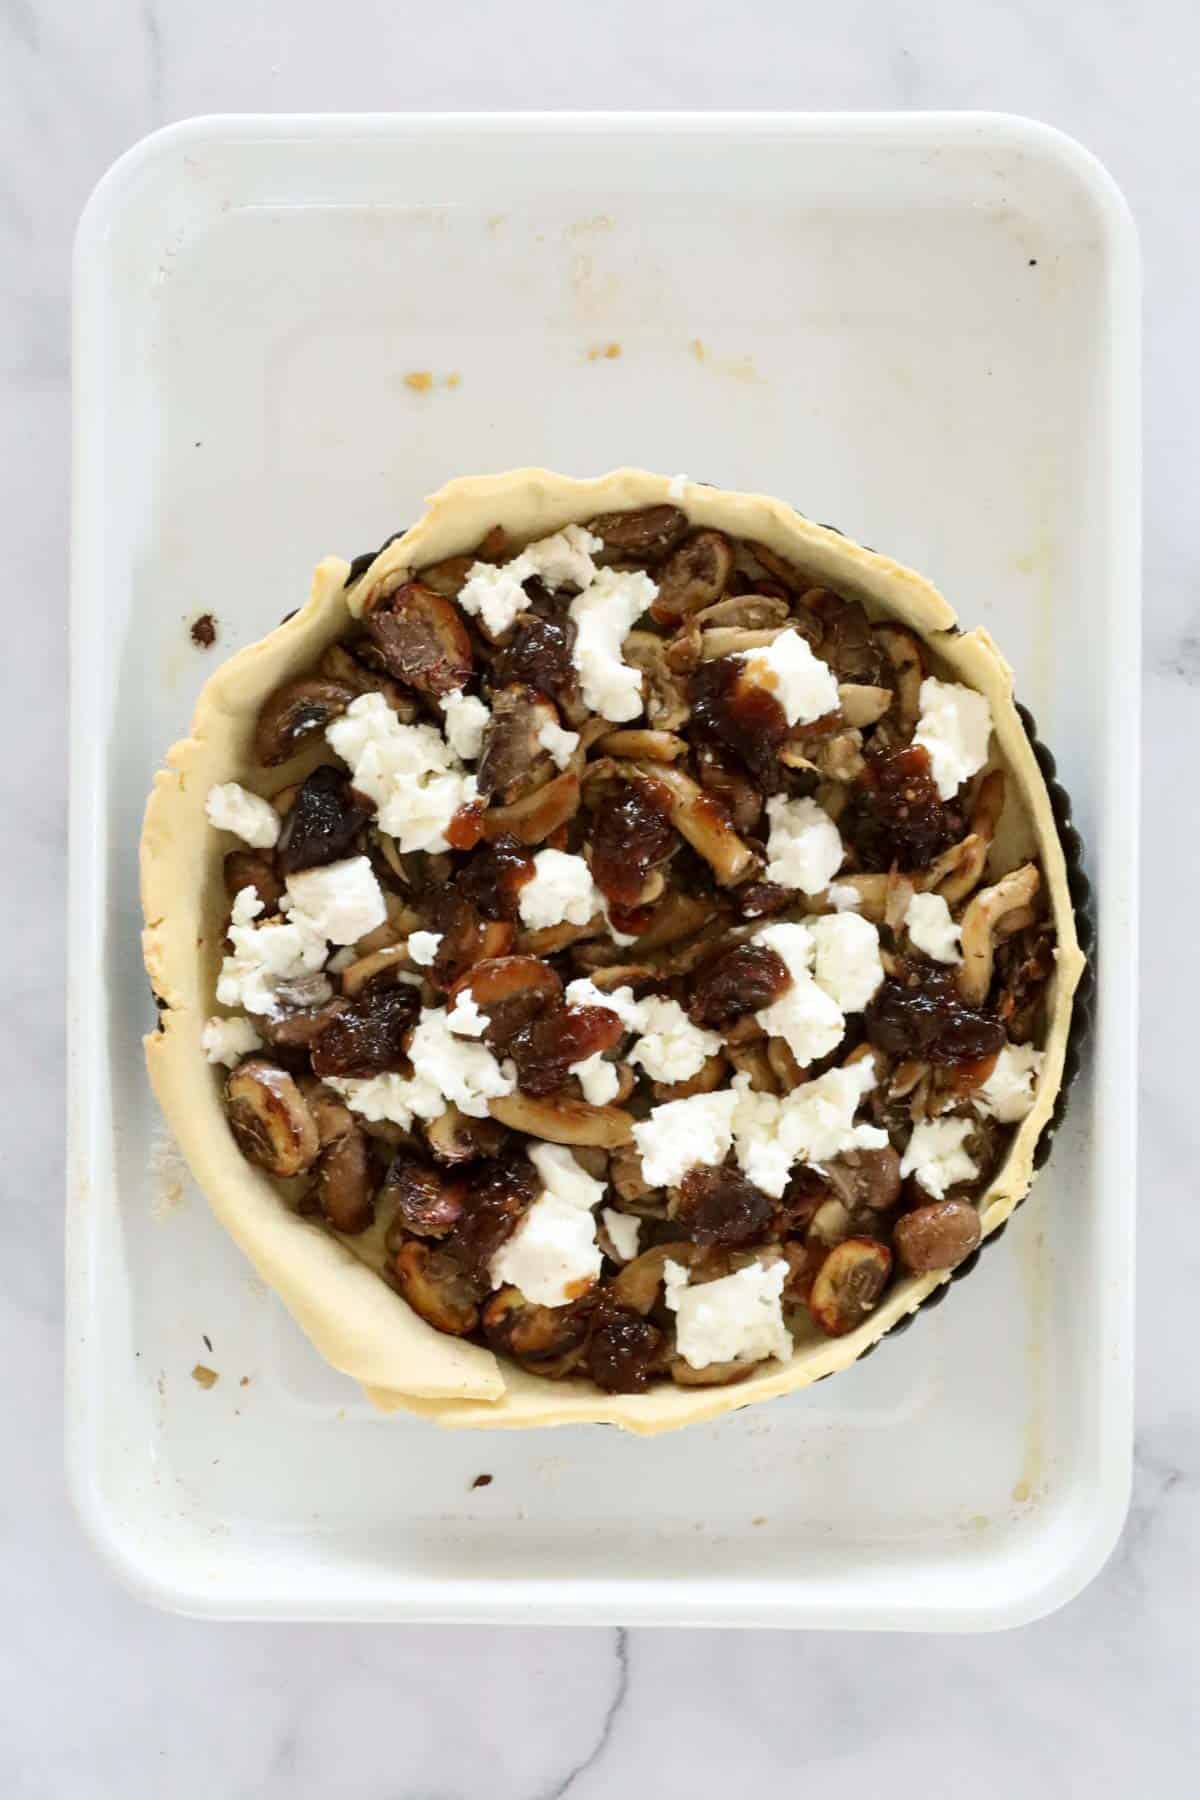 Fried mushrooms, goats cheese and caramelised onions spread over a cooked pastry shell.